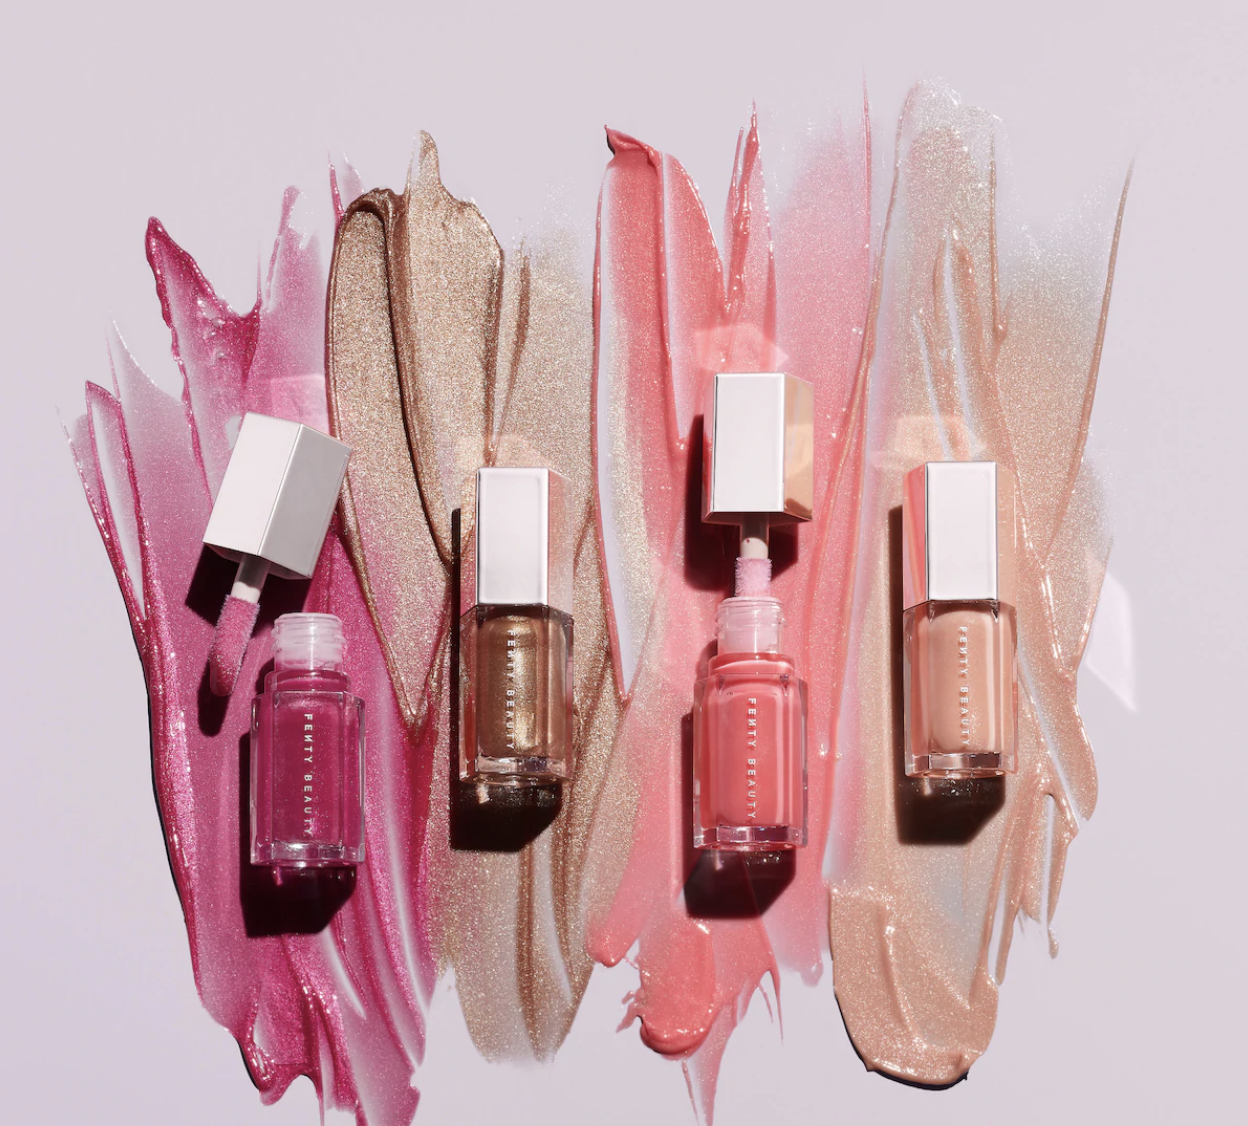 The lip gloss tubes in cranberry, brown, pink, and nude shades